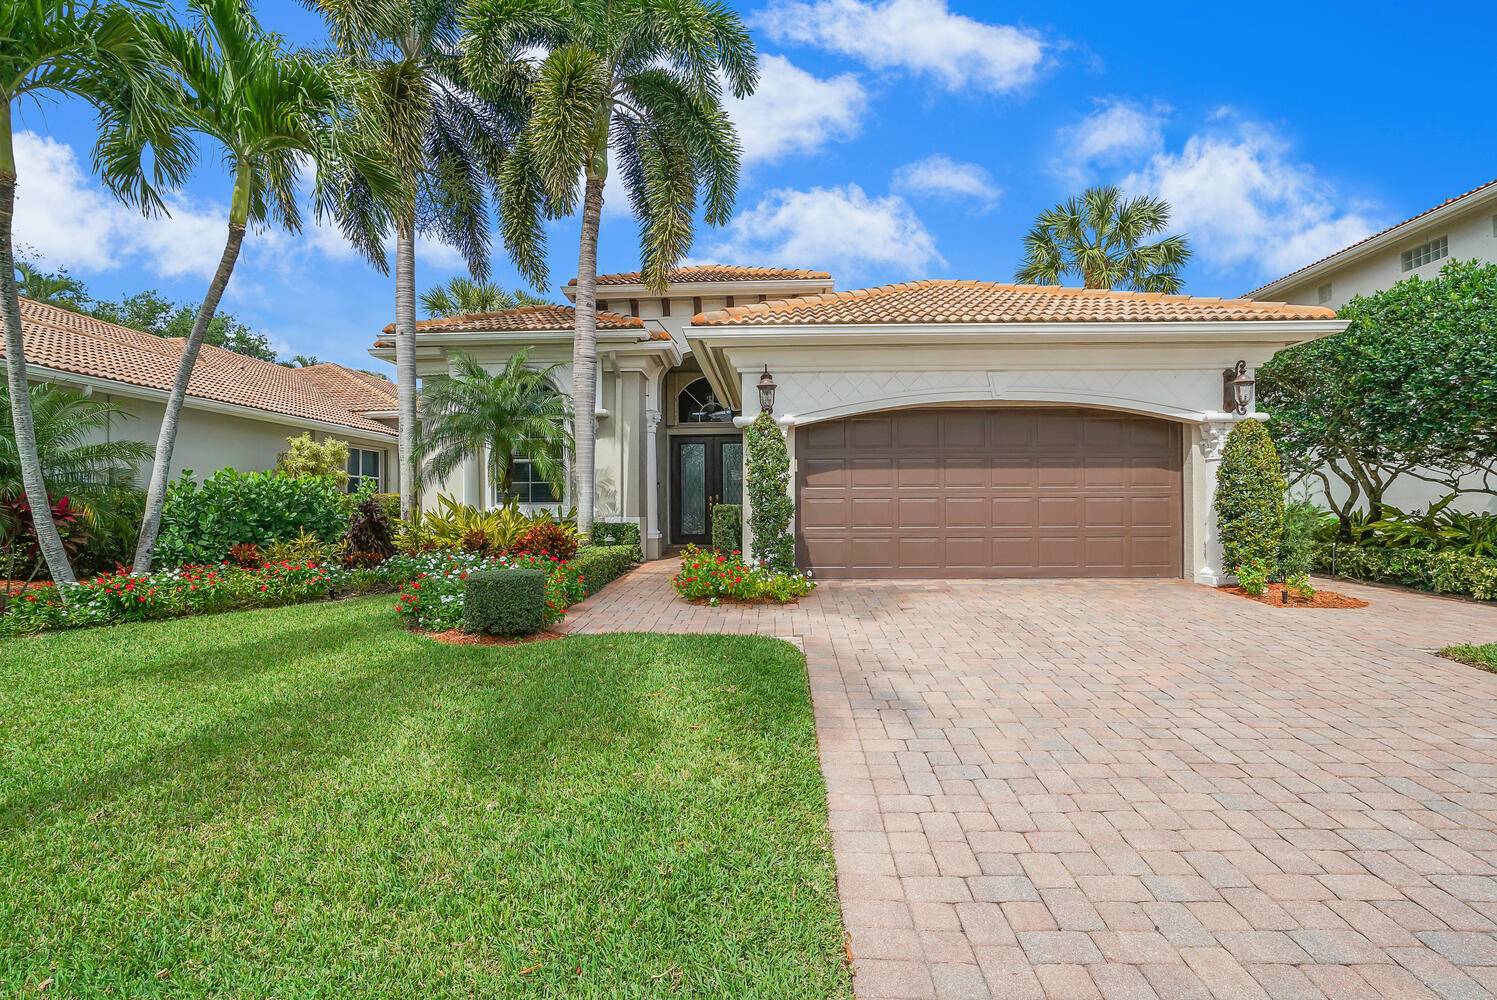 BEAUTIFUL ONE STORY HOME SITS ON A GORGEOUS OVERSIZED GOLF COURSE LOT.